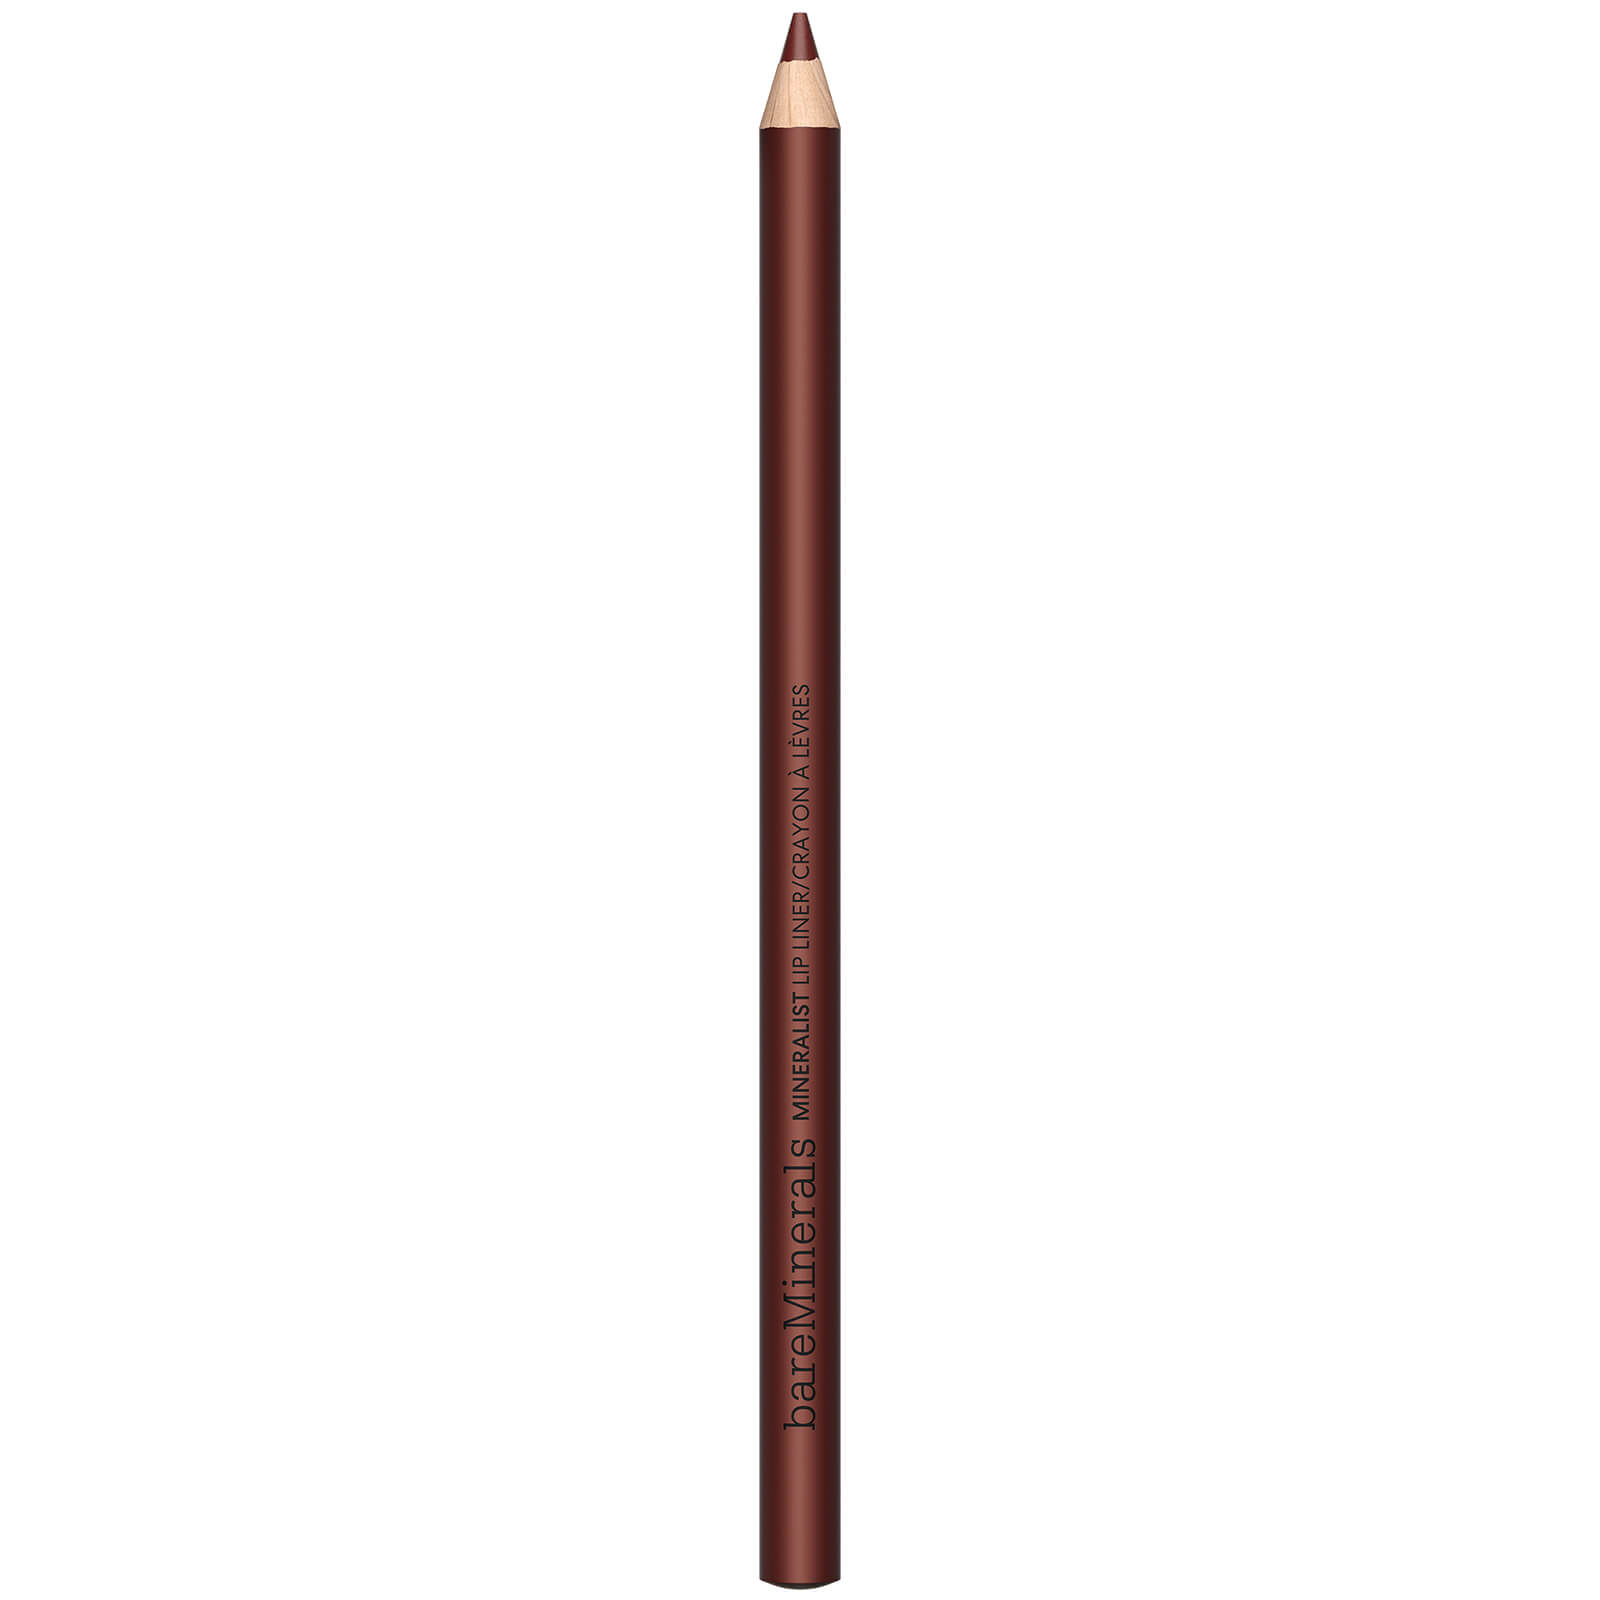 Image of bareMinerals Mineralist Lip Liner 1.5g (Various Shades) - Cocoa